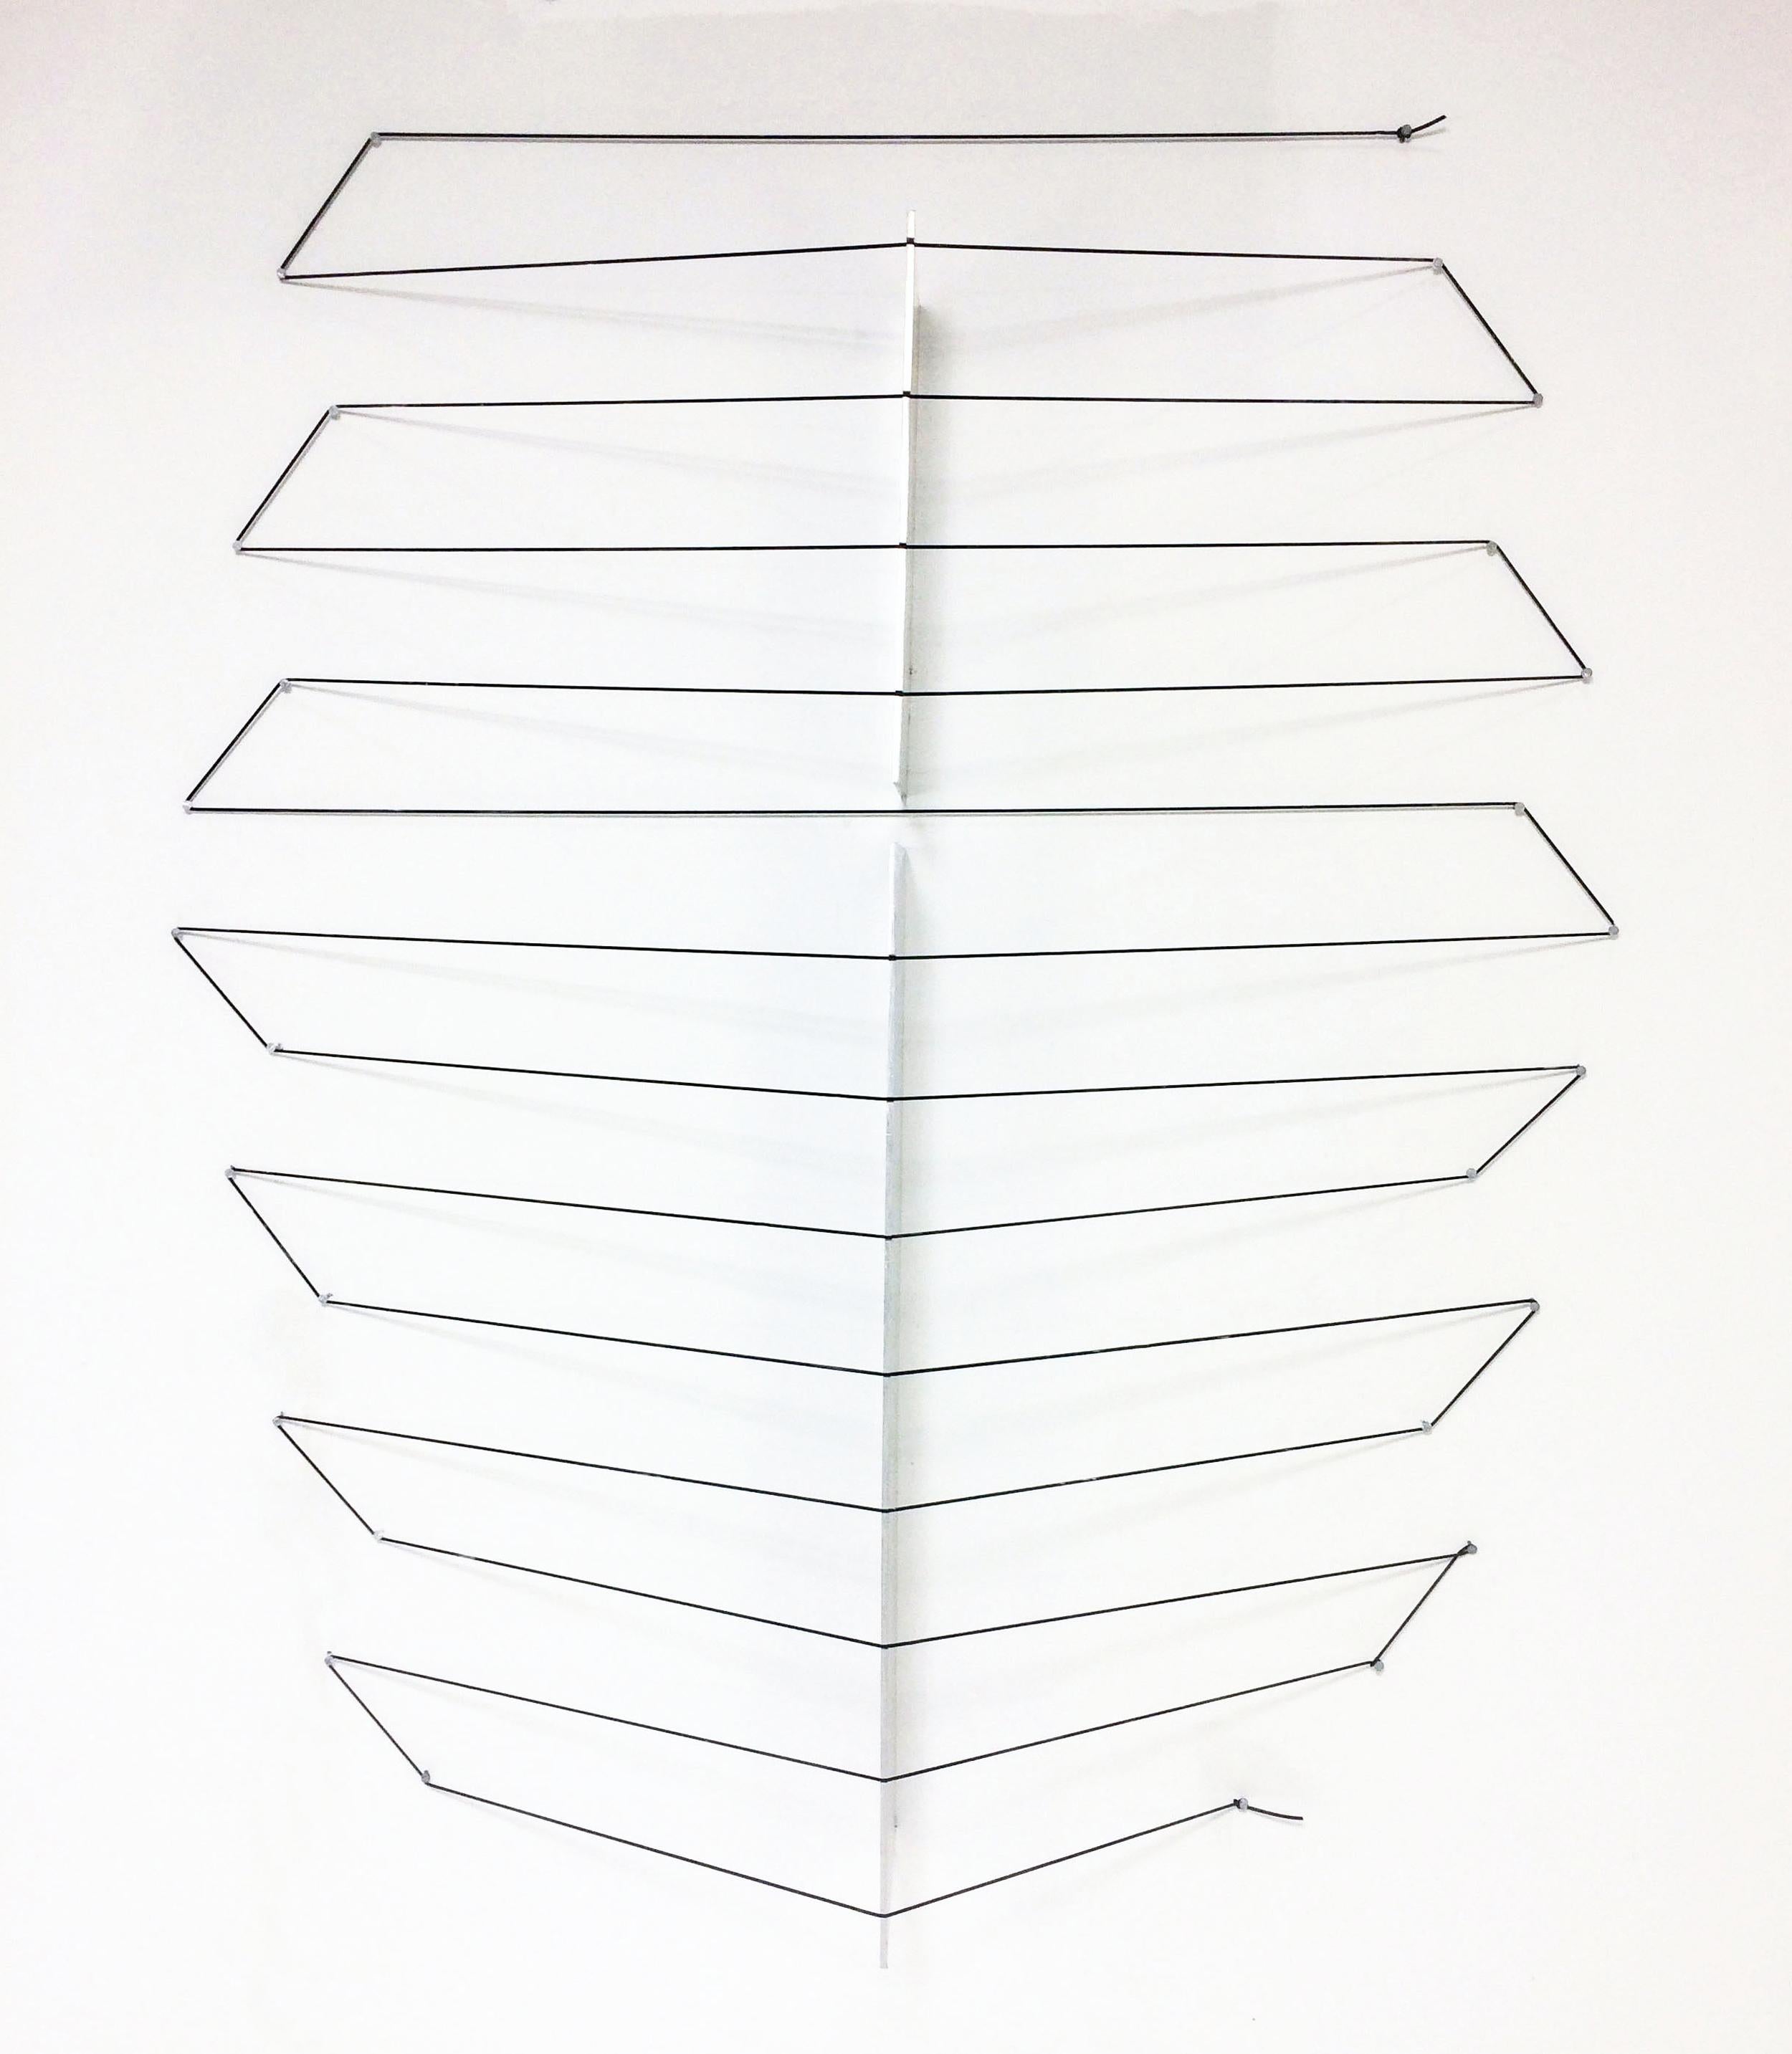 Sonambient wall mounted sculpture by Carol Kreeger Davidson, dated 1975.. Aluminum, neoprene, and flooring nails. 

Davidson (1929-2014) was an accomplished Post-minimalist artist best known for her work in folded paper and bronze. She was